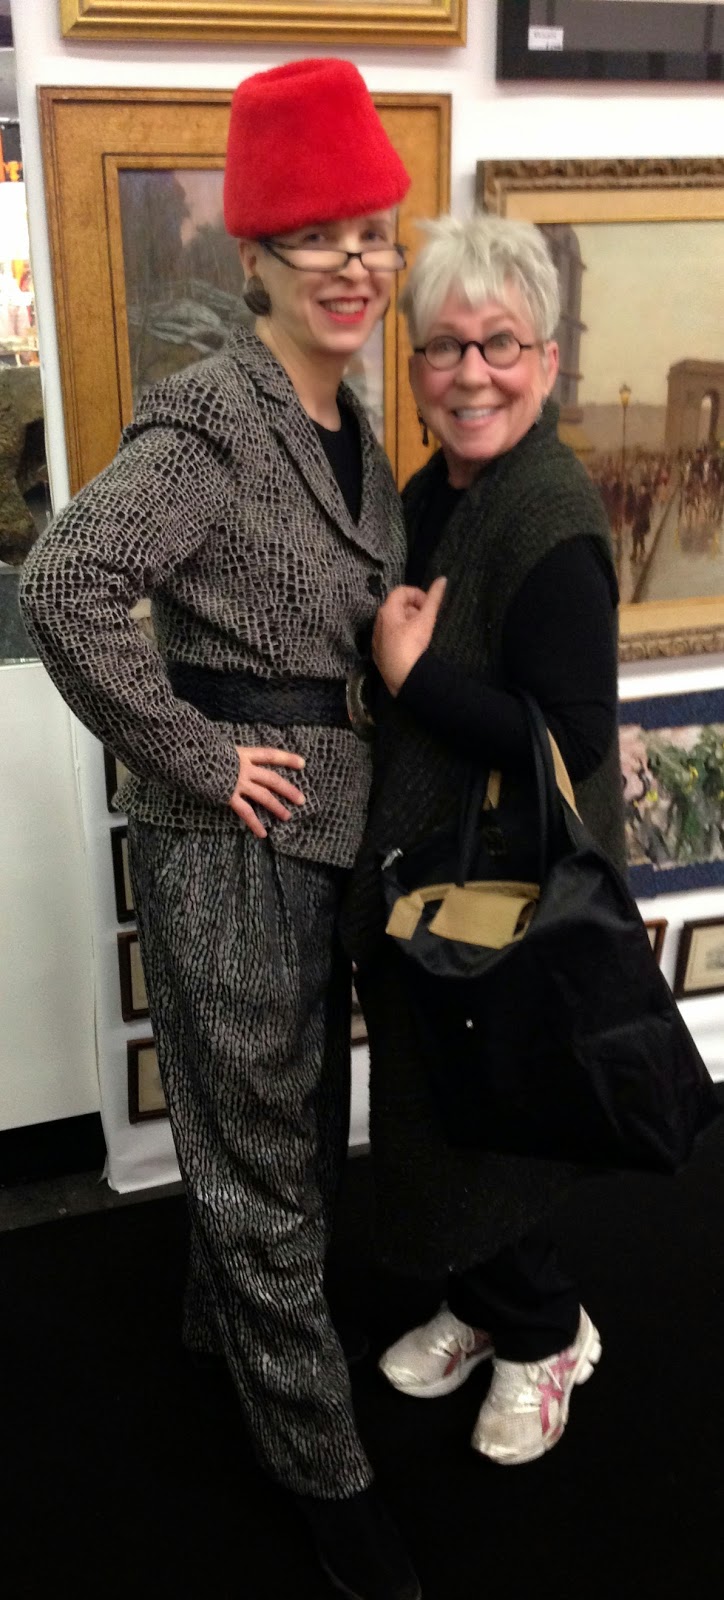 Idiosyncratic Fashionistas: Treasure Hunting at the Pier Antique Show